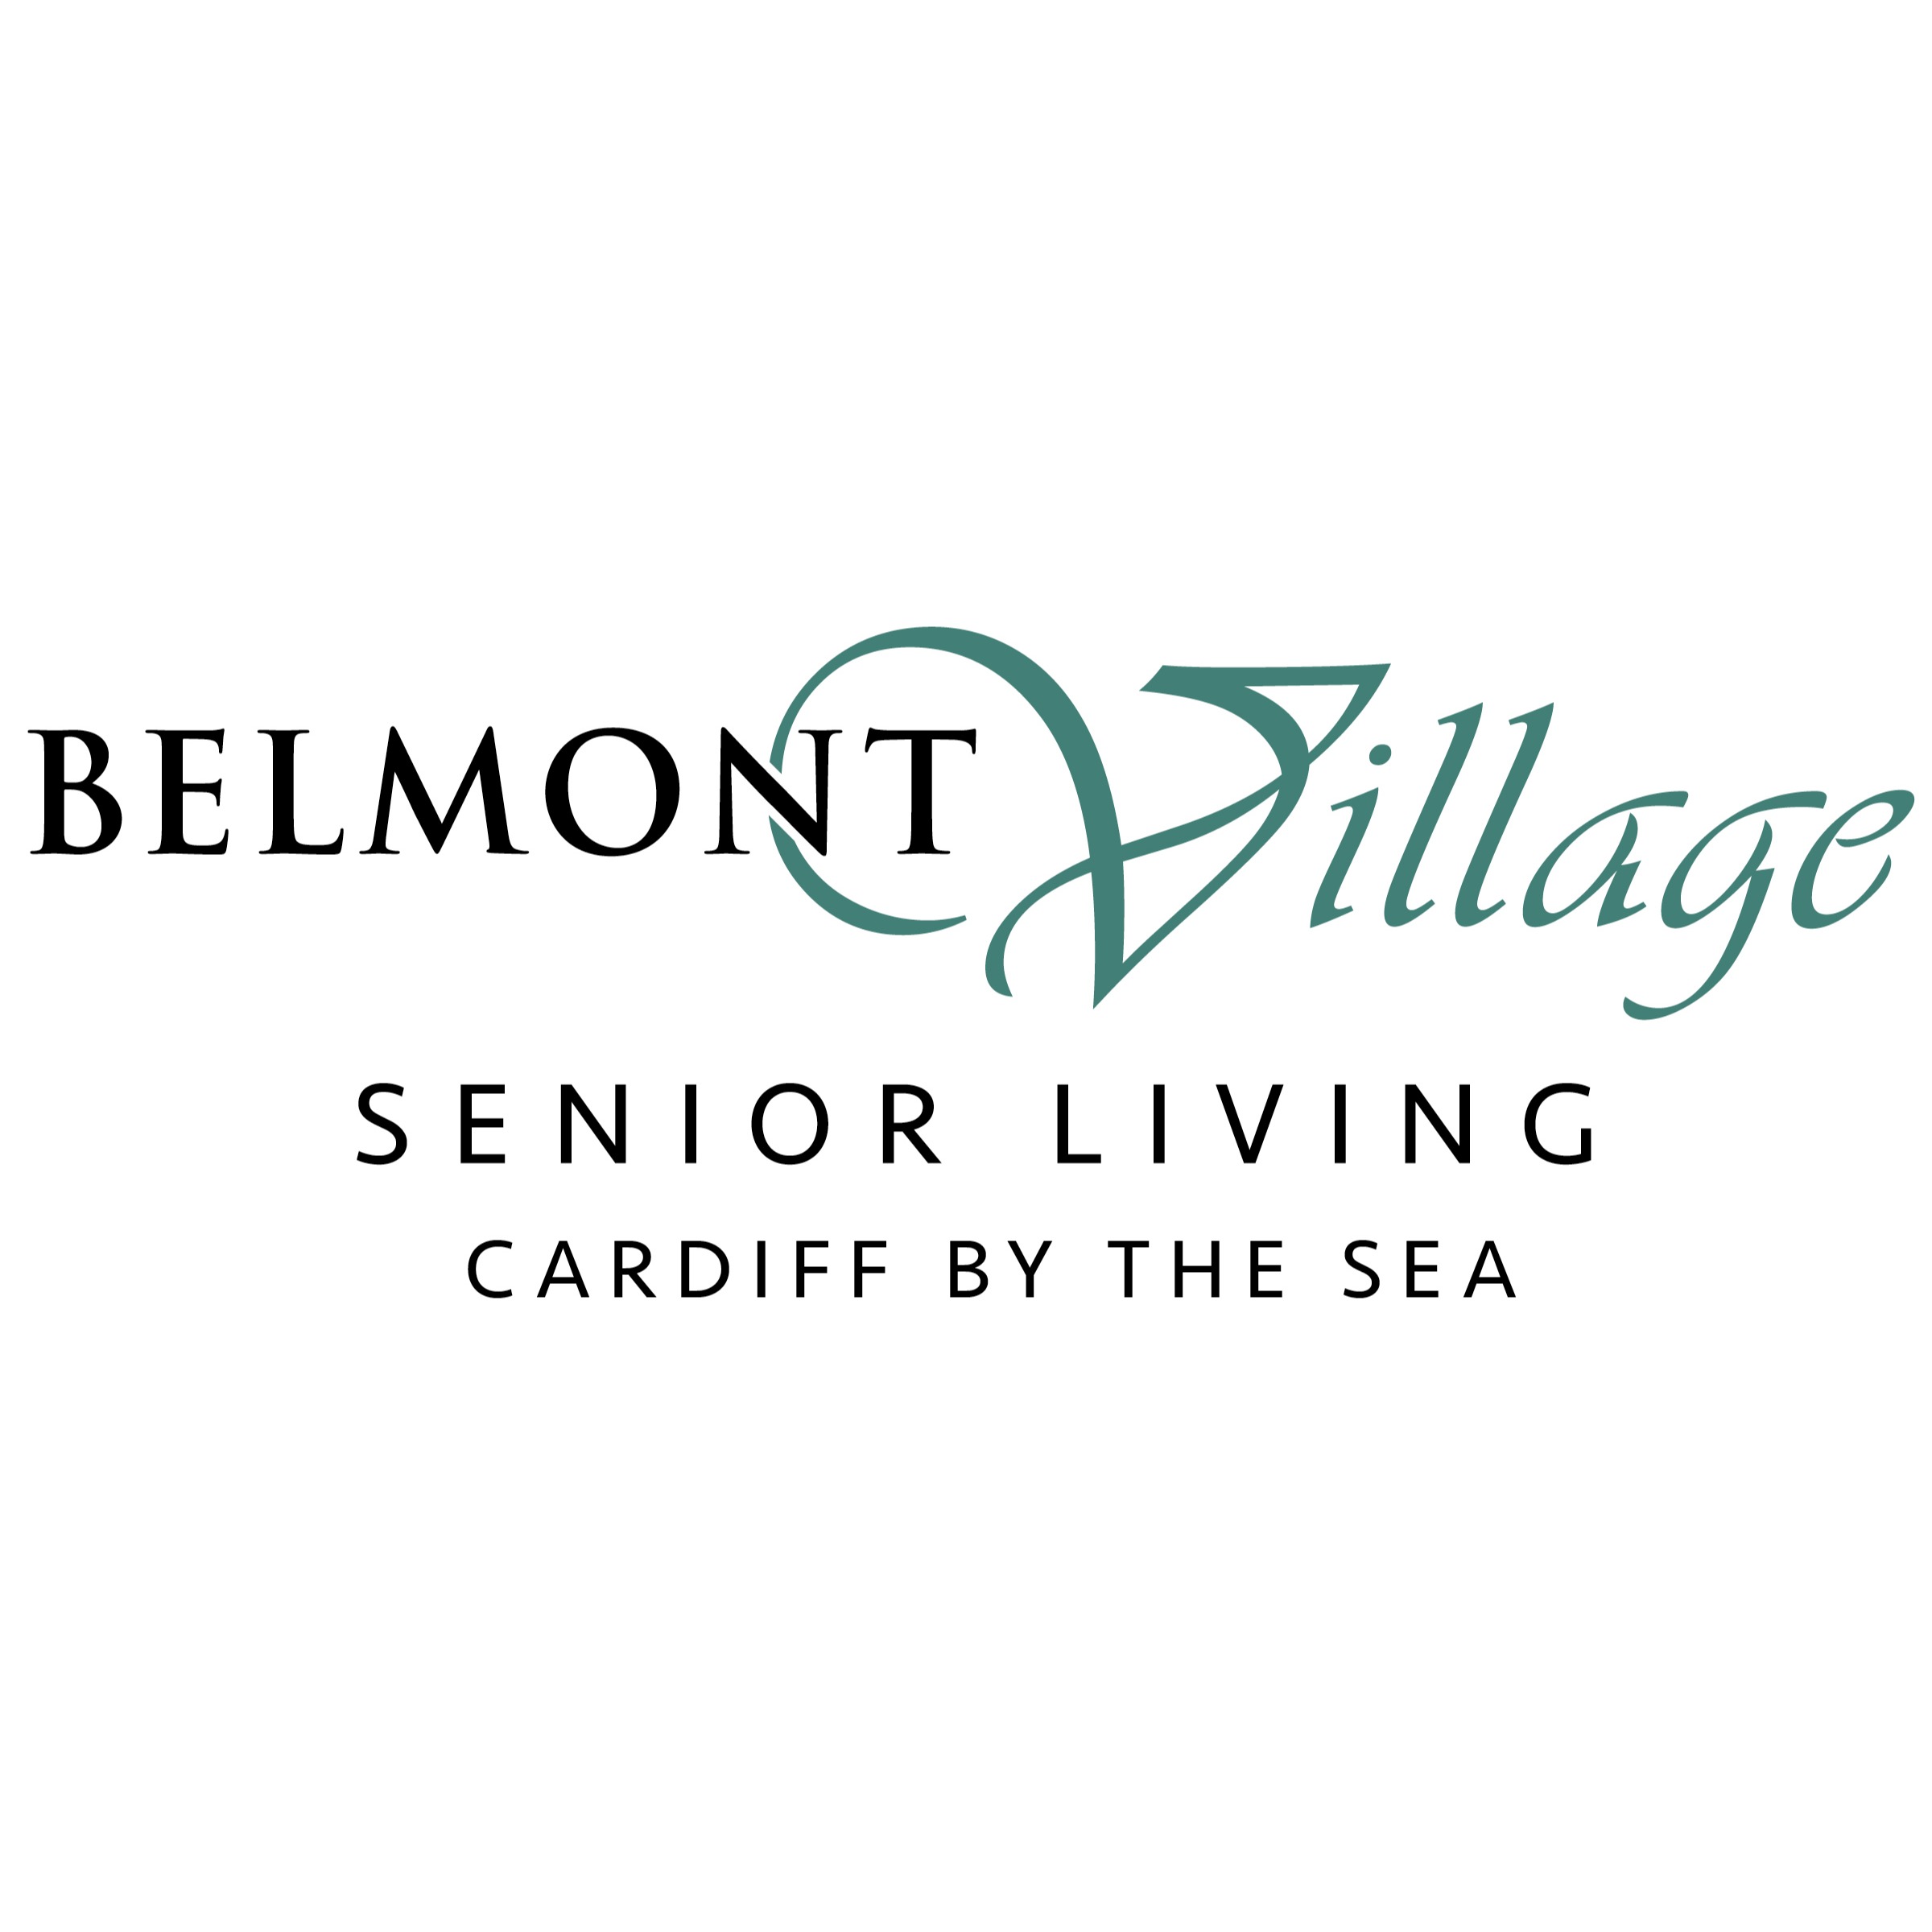 Belmont Village Senior Living Cardiff by the Sea - Cardiff by the Sea, CA 92007 - (760)388-7471 | ShowMeLocal.com